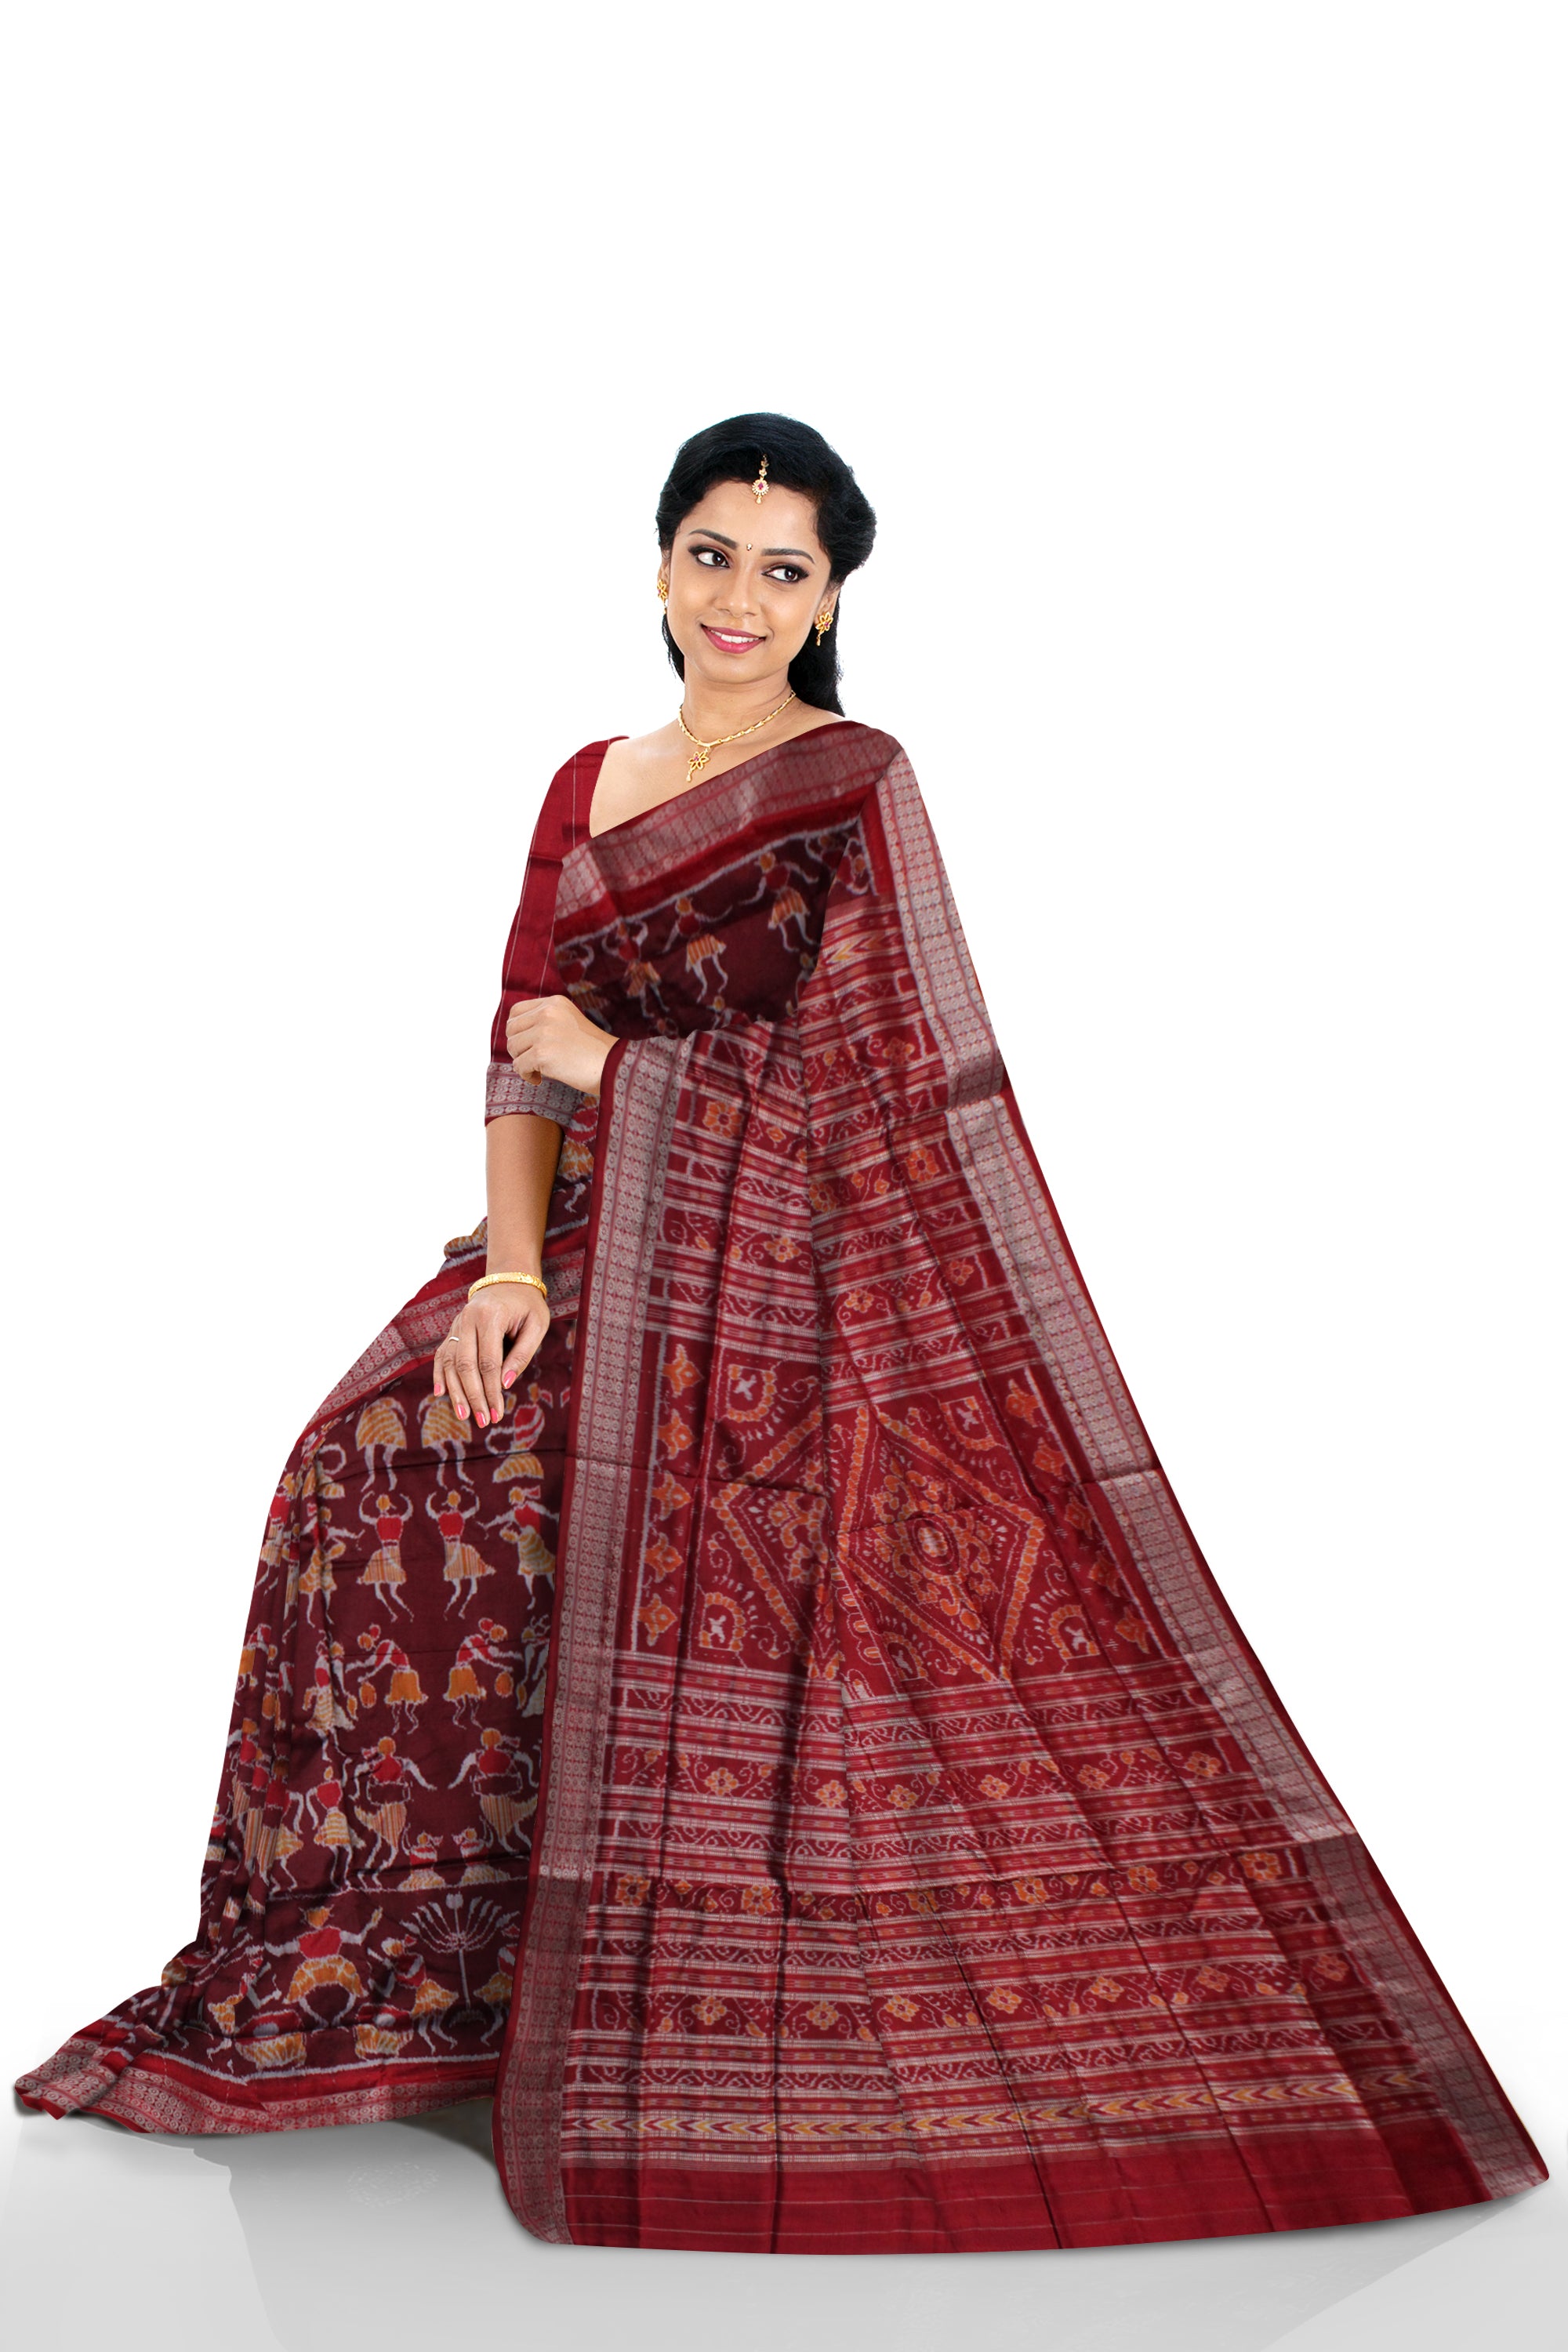 TRIBAL DANCE PATTERN PURE SILK SAREE IS COFFEE WITH MAROON COLOR BASE,COMES WITH MATCHING BLOUSE PIECE. - Koshali Arts & Crafts Enterprise